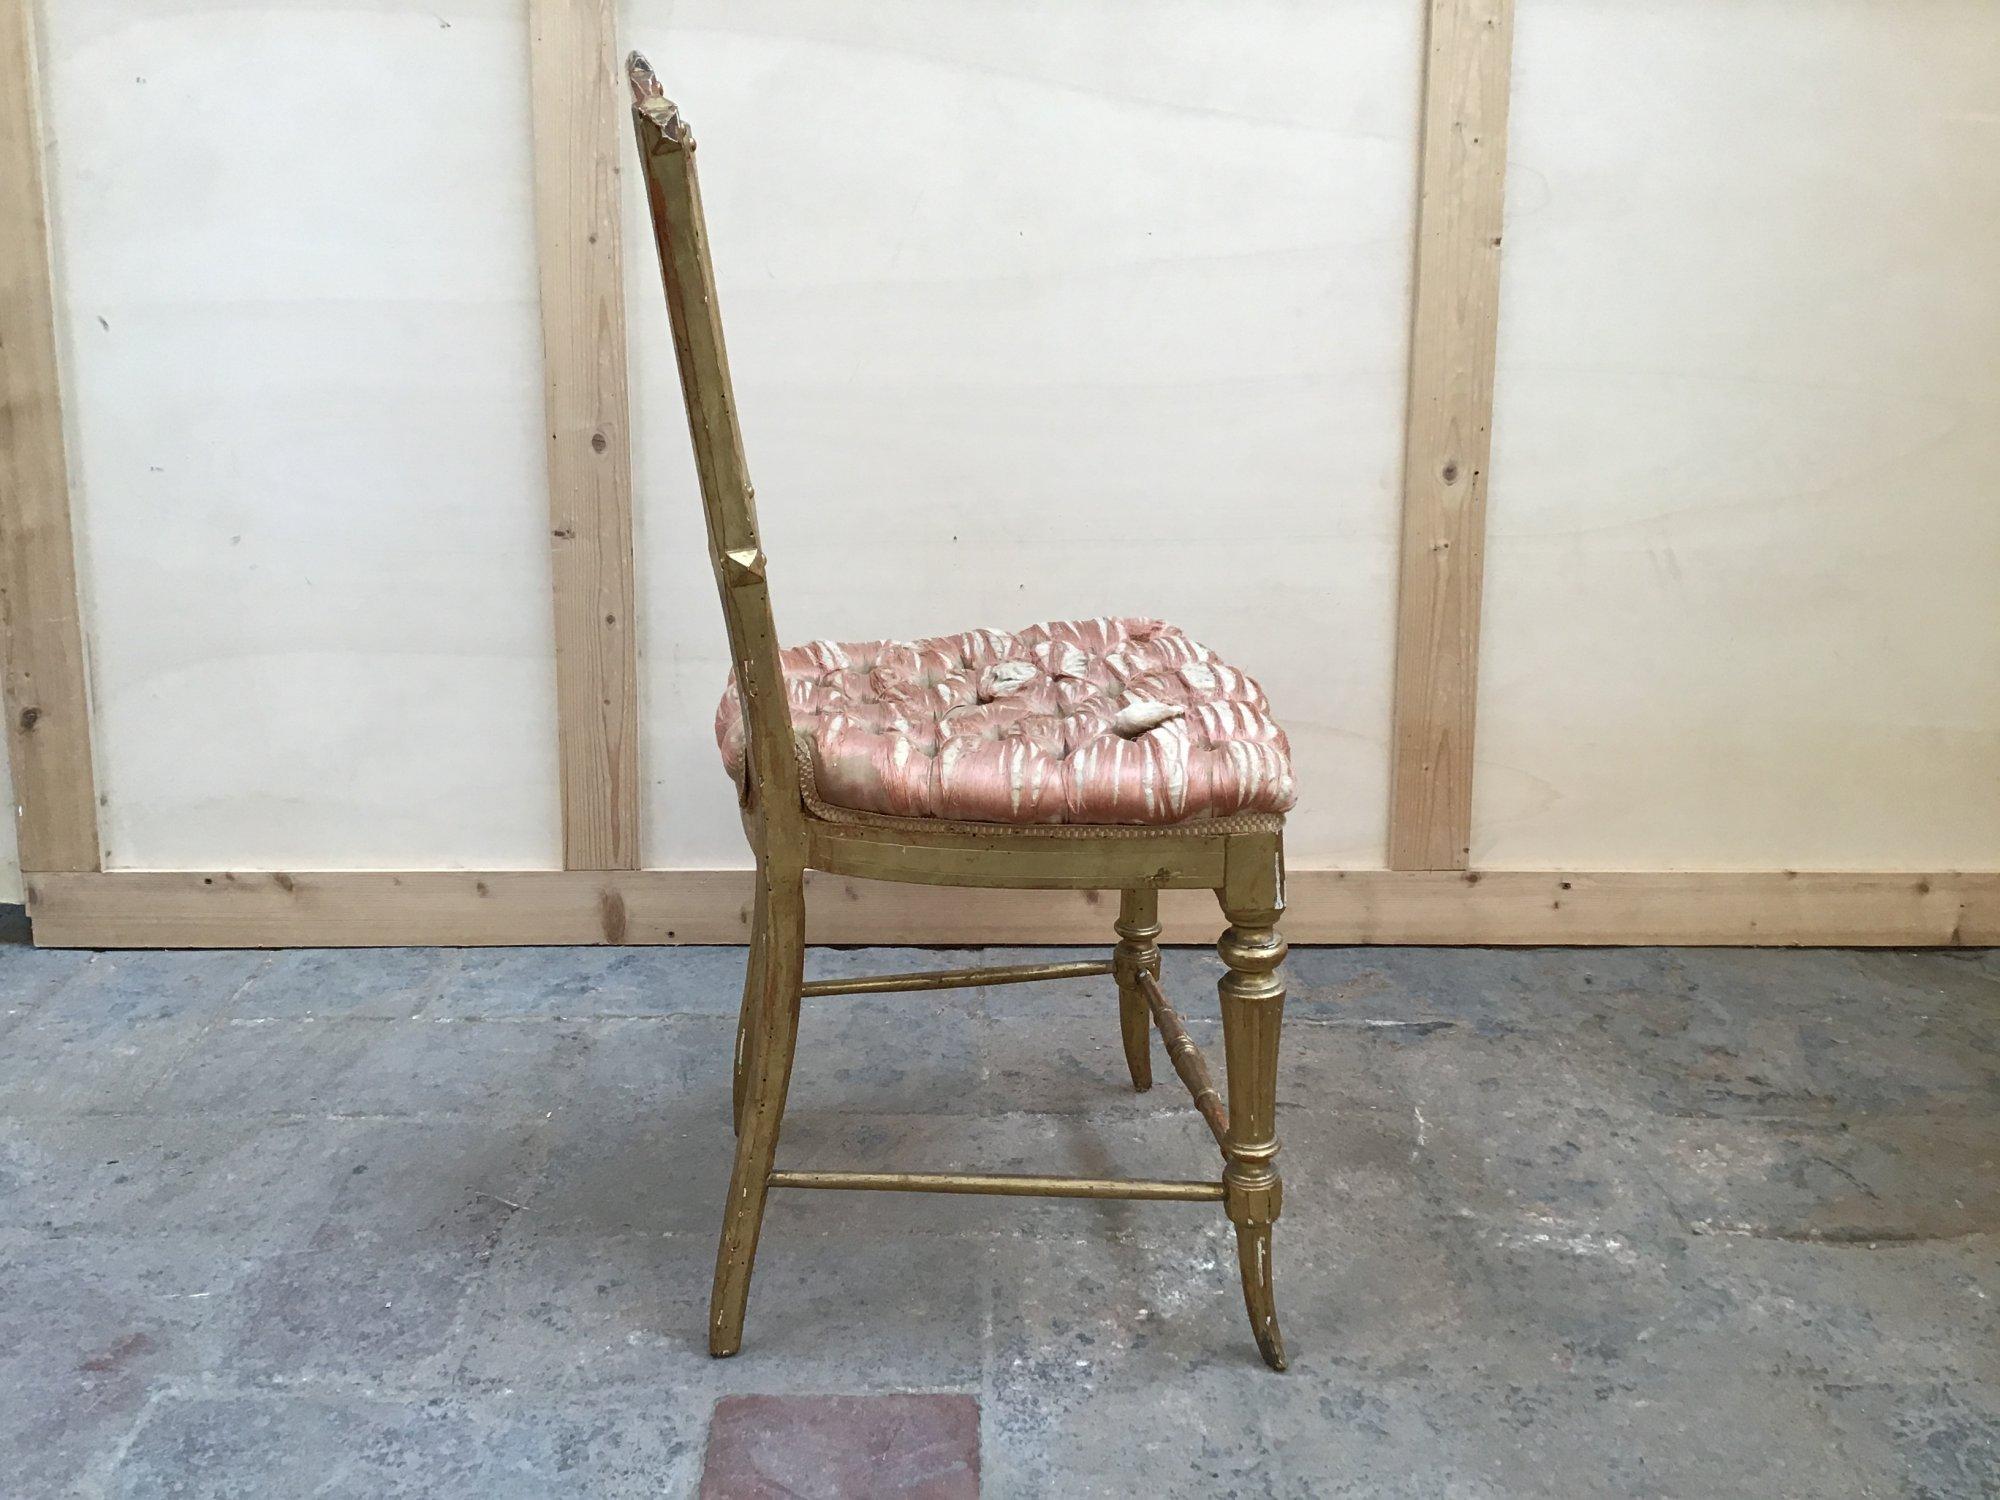 Late 19th Century 19th Century Italian Pair of Gilt Wooden Chairs with Original Upholstery, 1890s For Sale